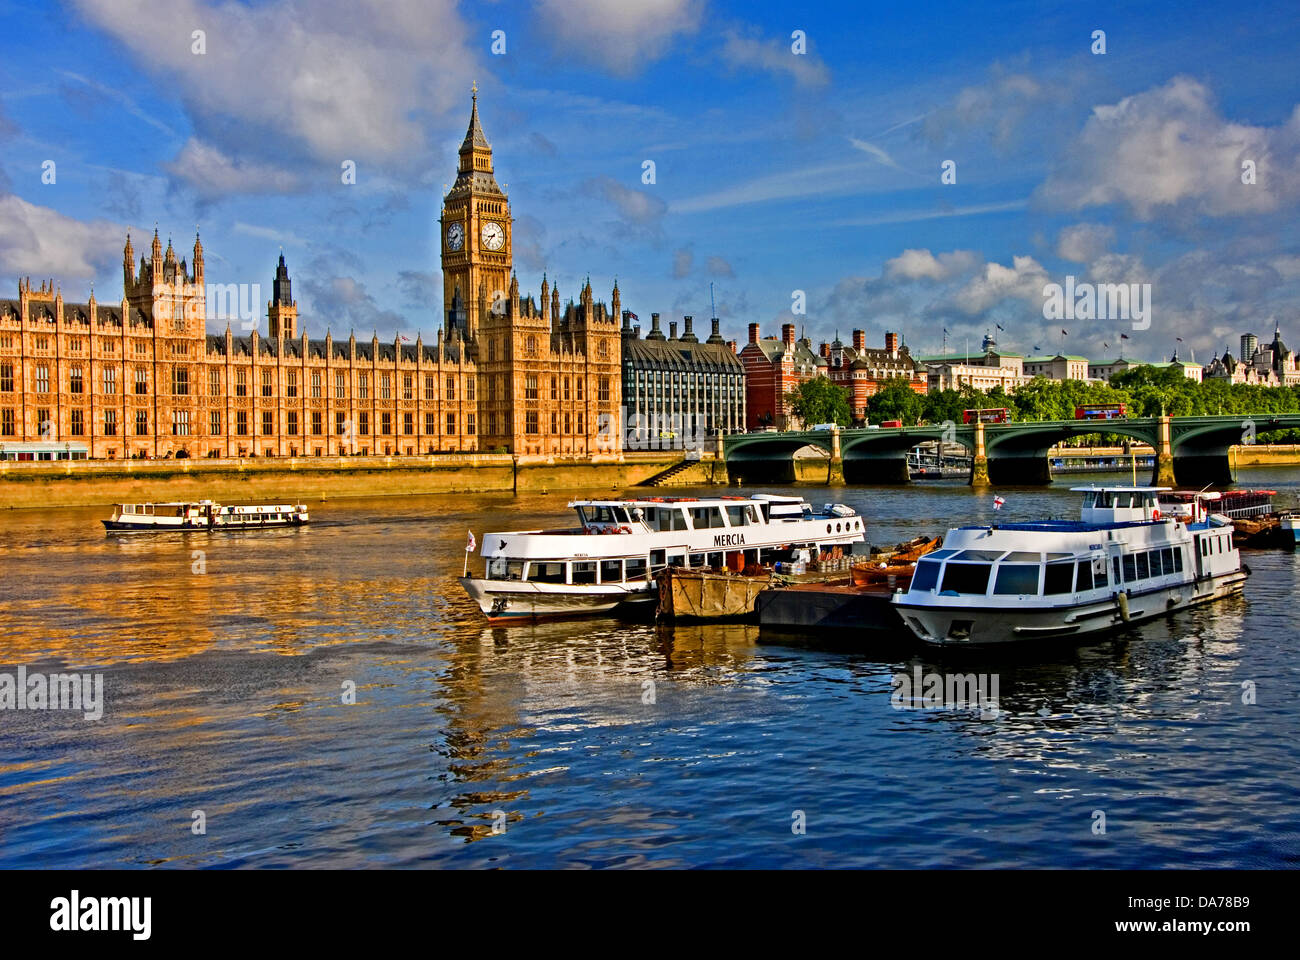 Palace of Westminster and Big Ben overlook the River Thames in central London Stock Photo